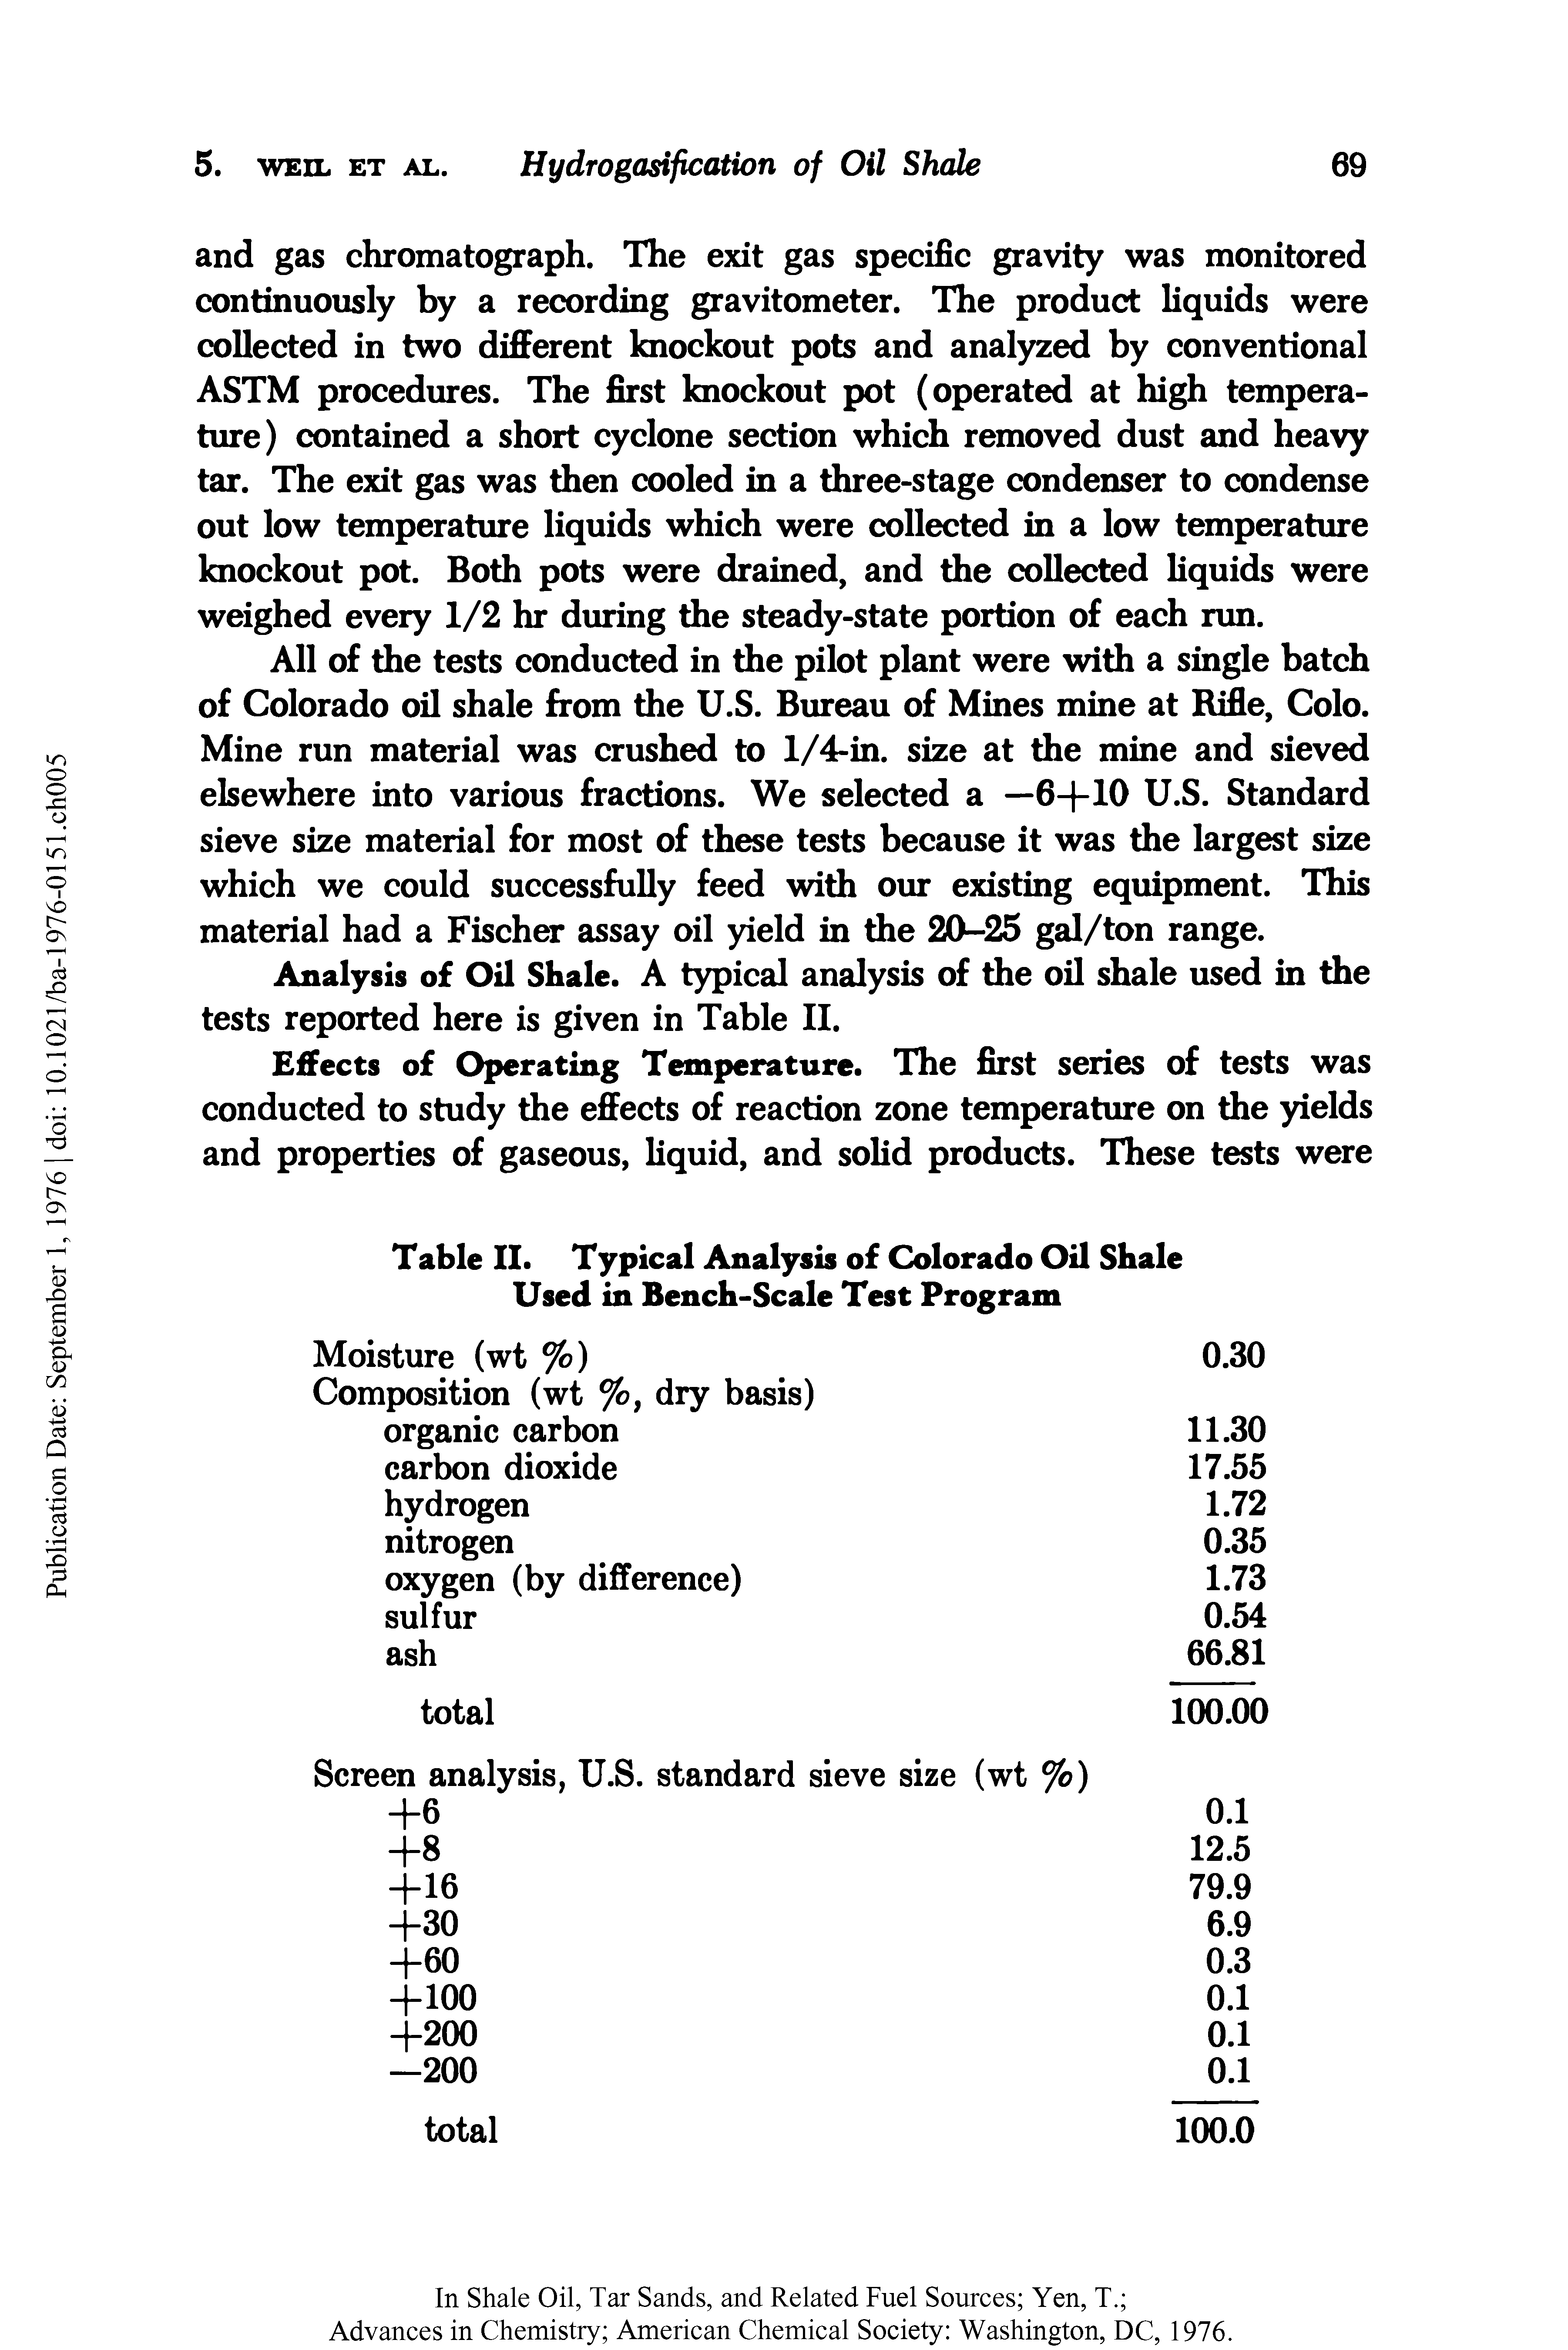 Table II. Typical Analysis of Colorado Oil Shale Used in Bench-Scale Test Program...